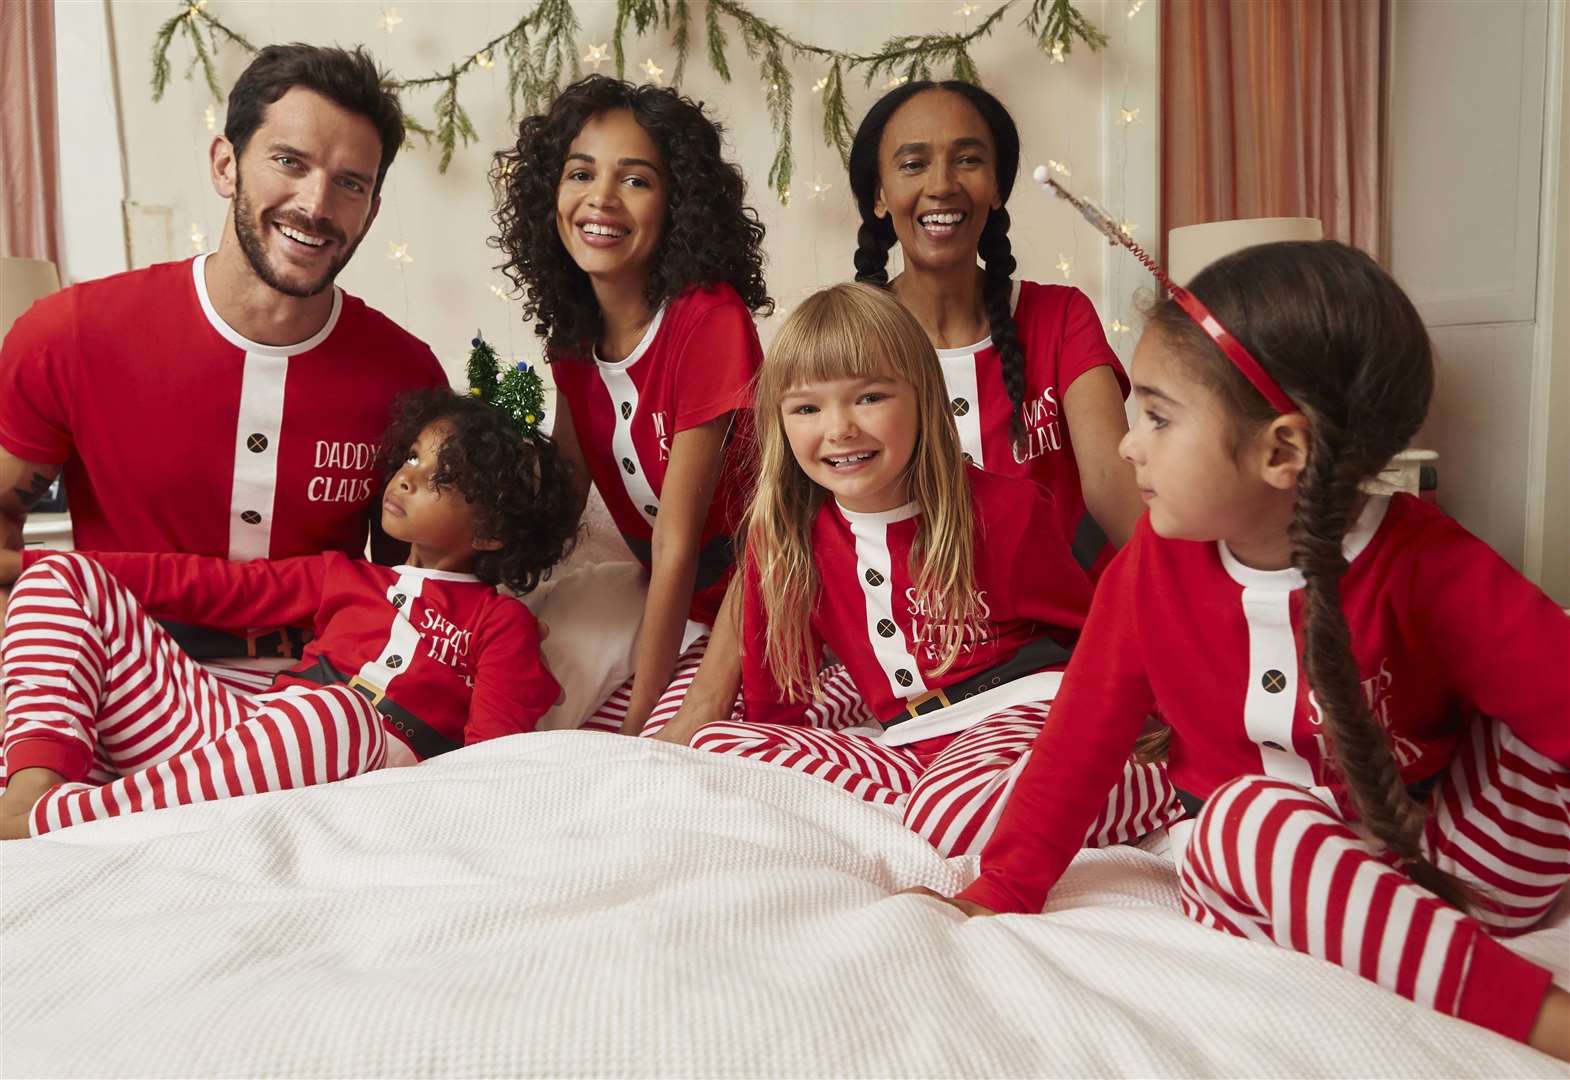 5. The Claus family jammies